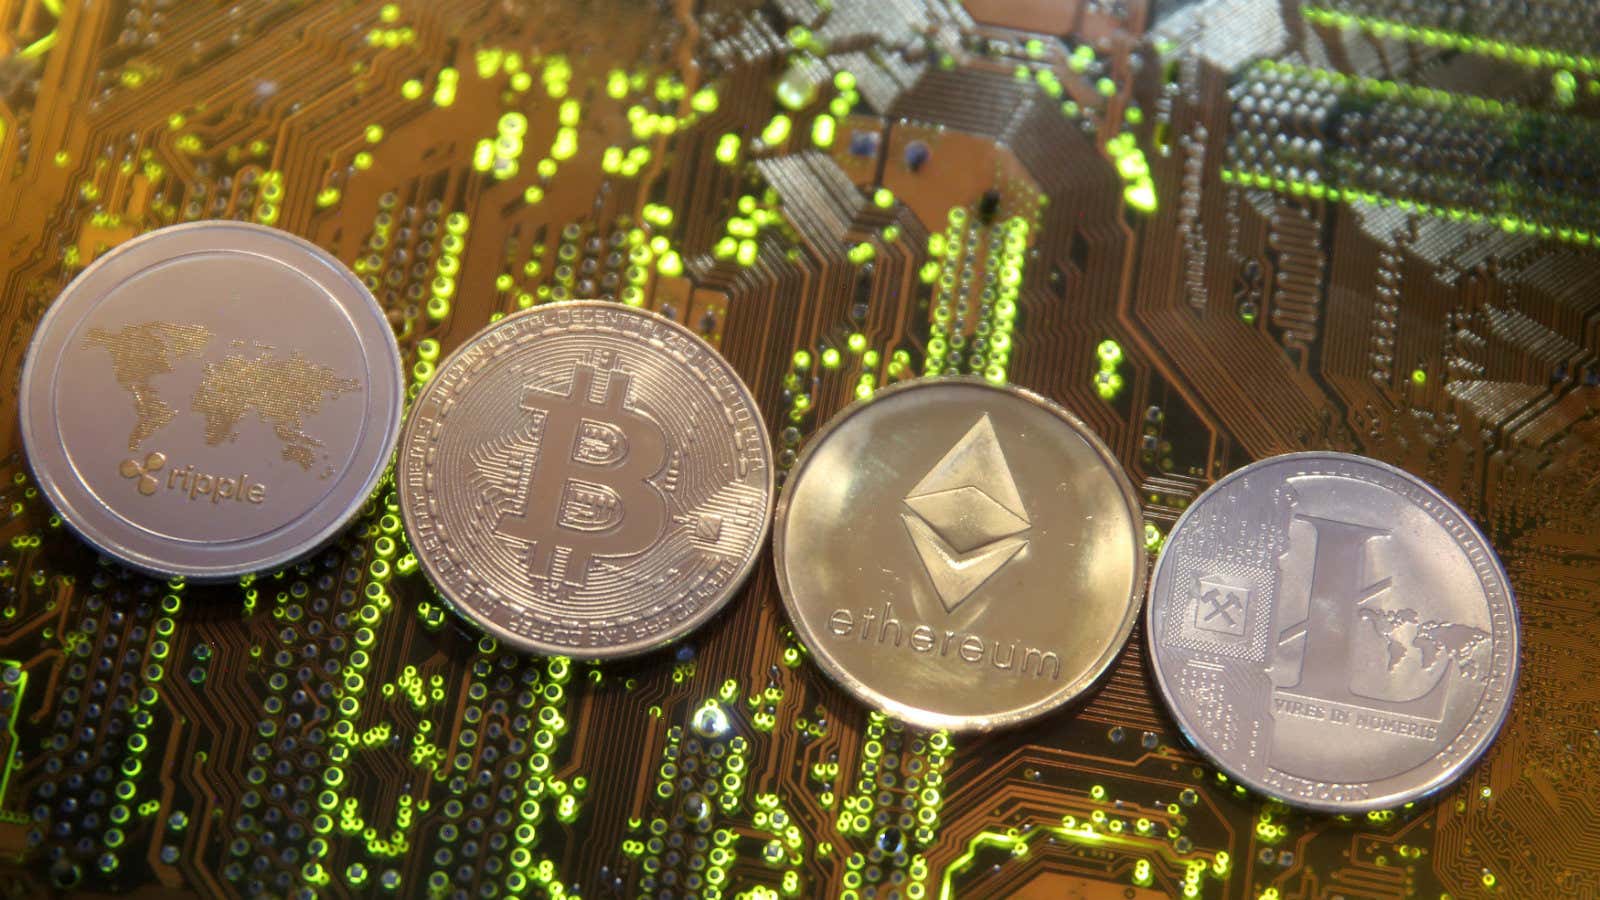 Cryptocurrency in India: What's the govt's stand, legal status, its future - BusinessToday